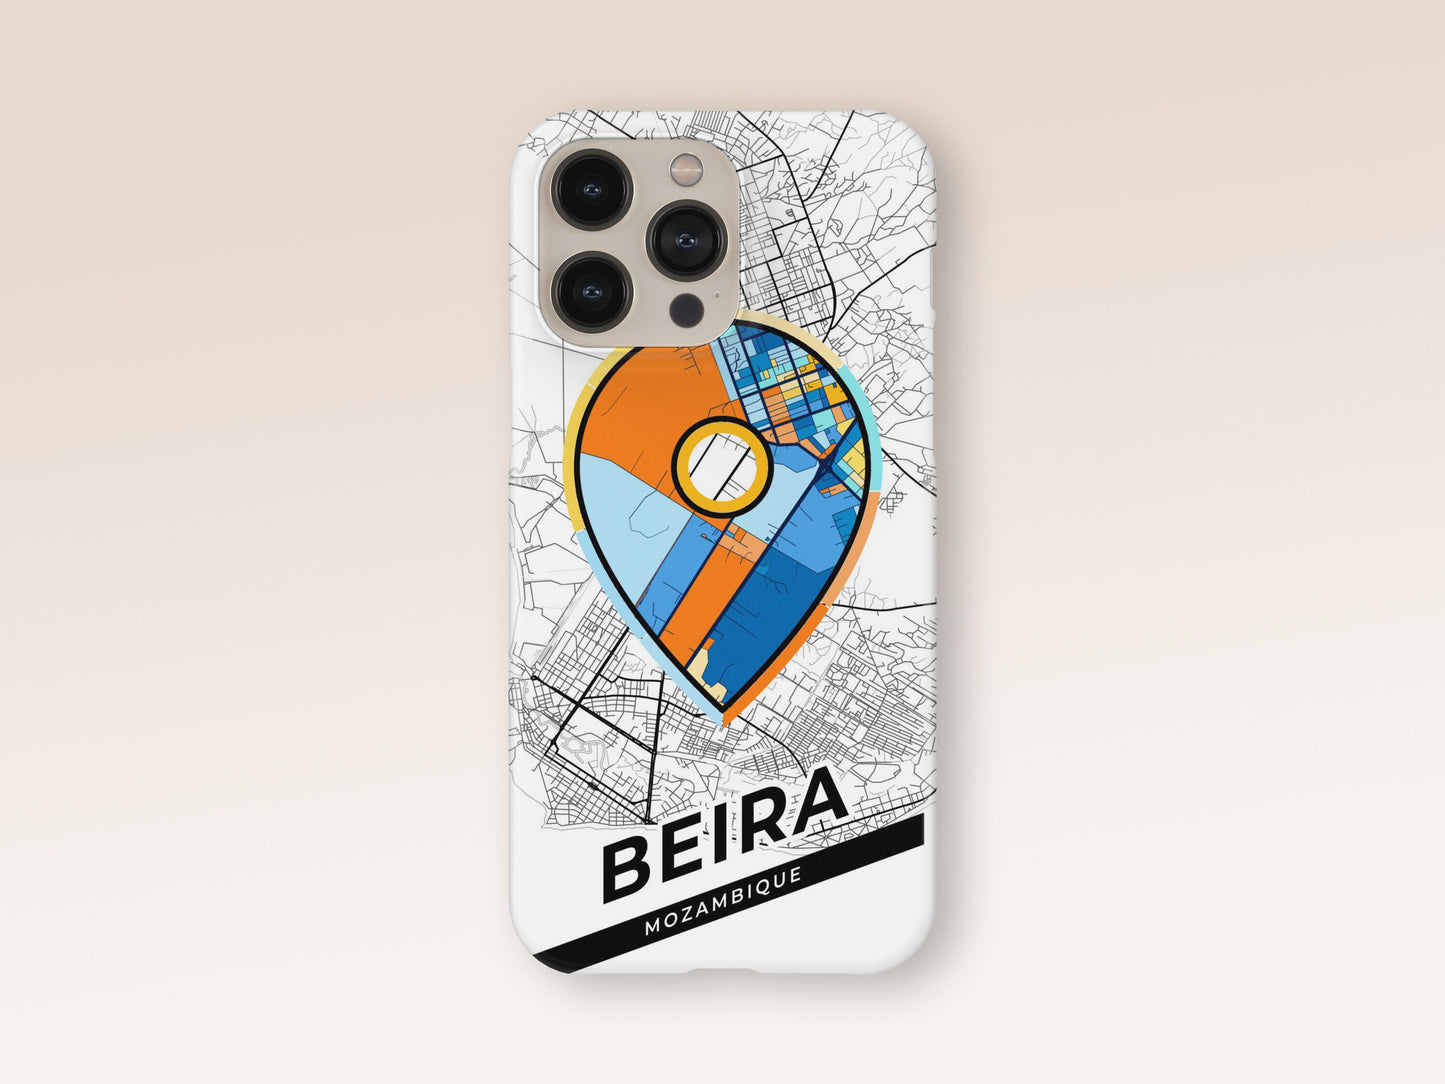 Beira Mozambique slim phone case with colorful icon. Birthday, wedding or housewarming gift. Couple match cases. 1